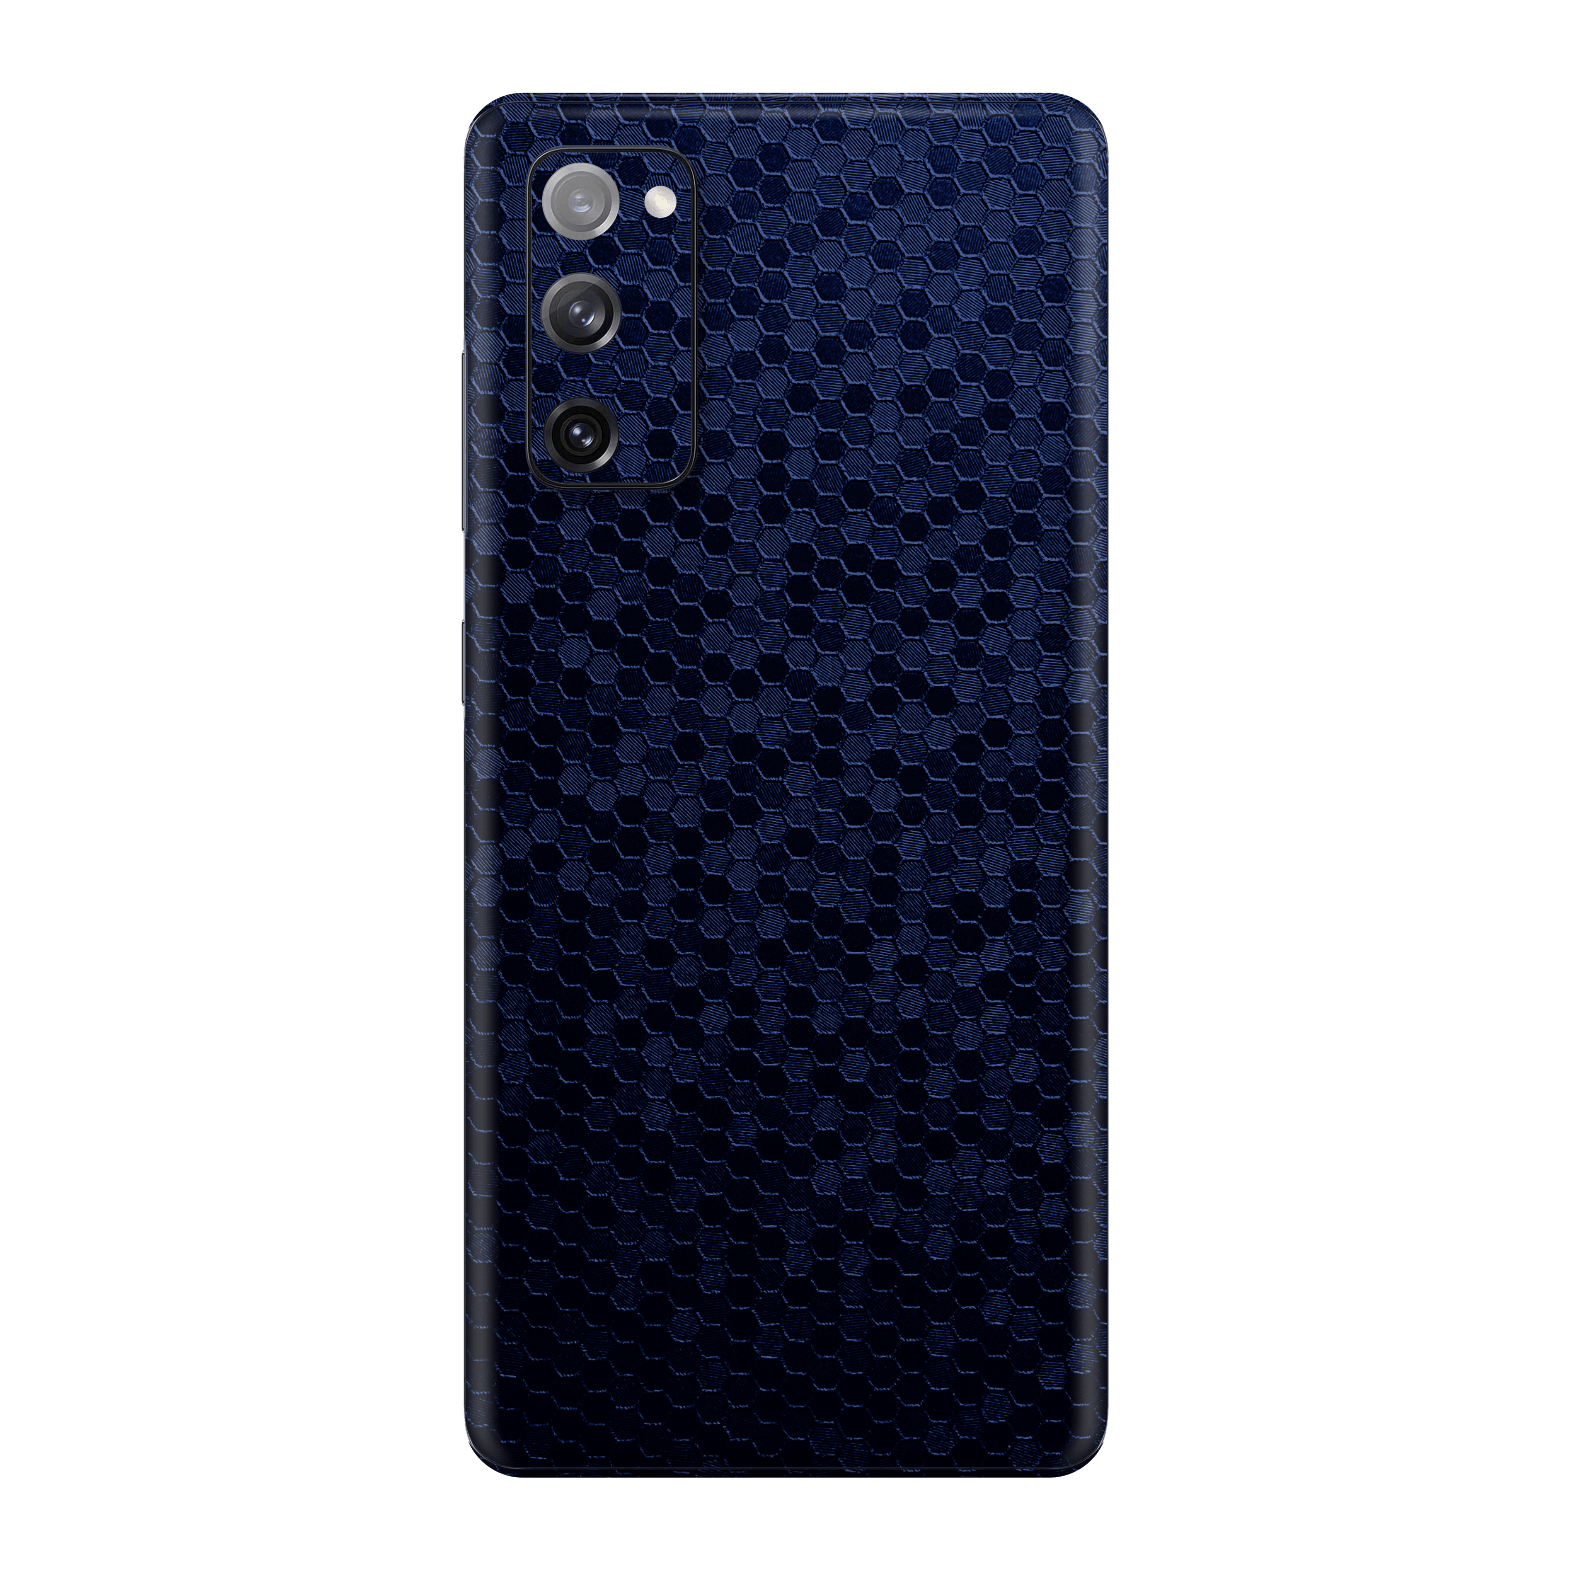 Samsung Galaxy S20 FE Luxuria Navy Blue Honeycomb 3D Textured Skin Wrap Sticker Decal Cover Protector by EasySkinz